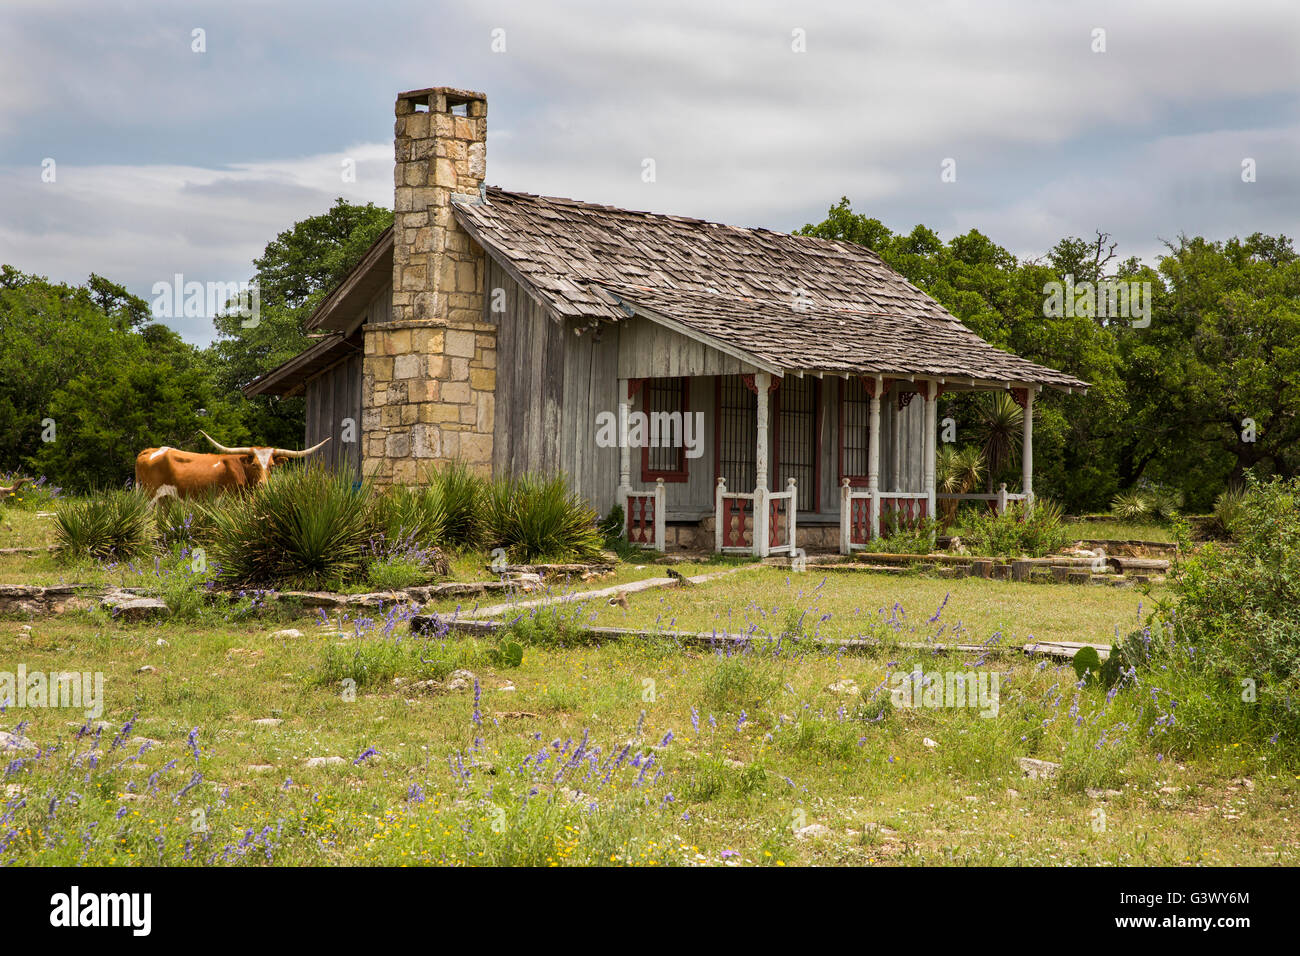 Texas cabin on ranch with longhorns Stock Photo